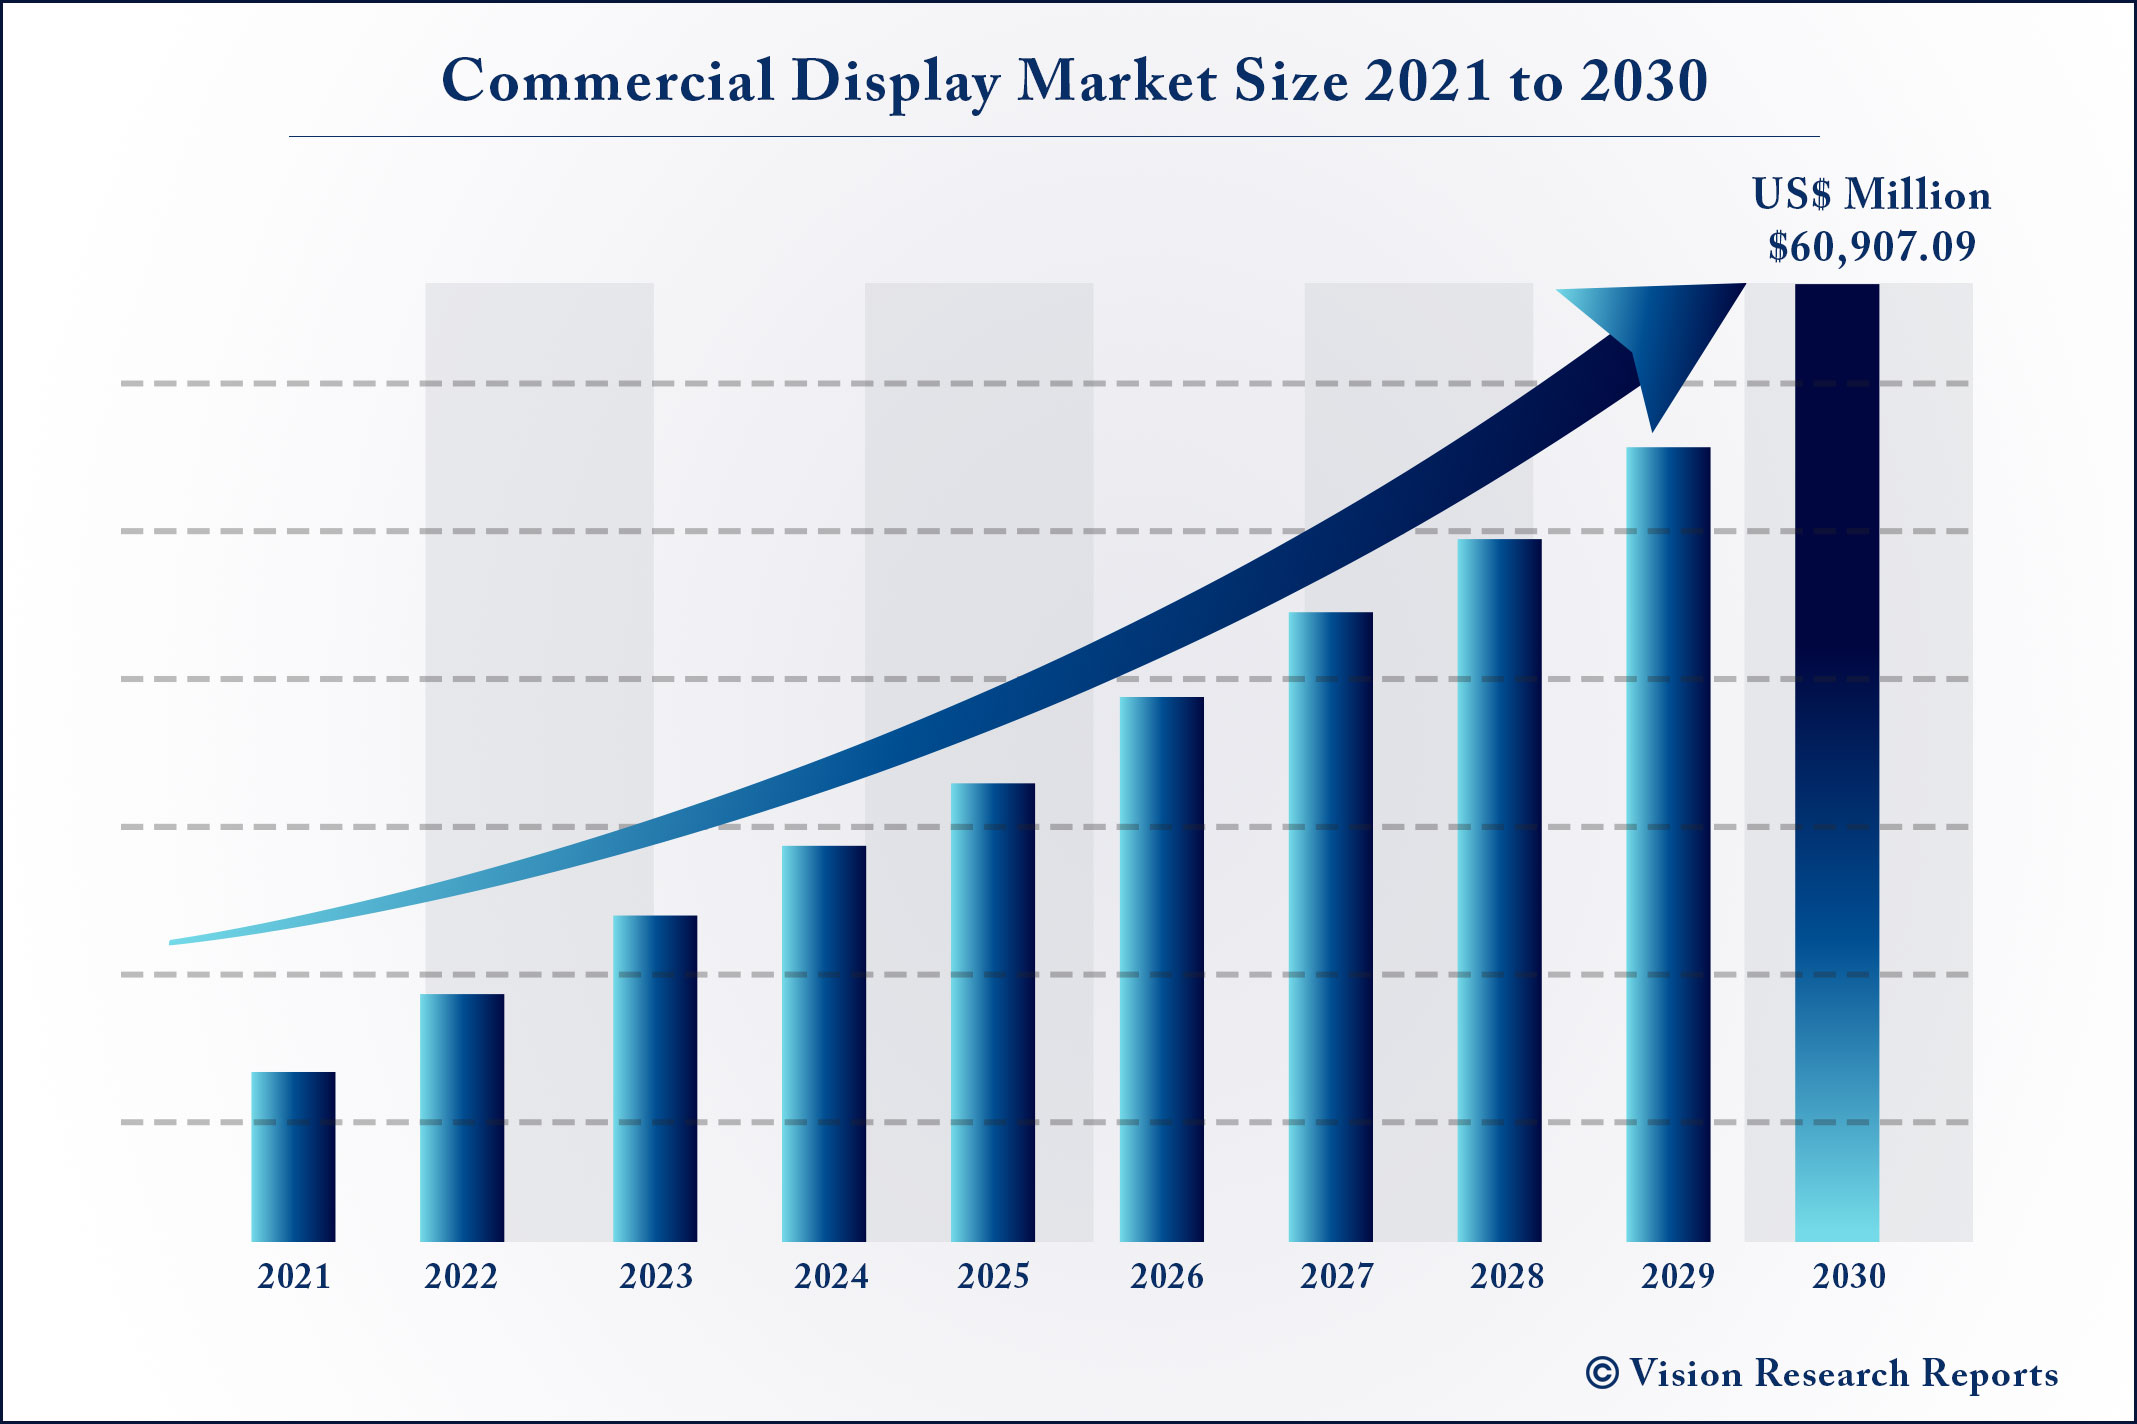 Commercial Display Market Size 2021 to 2030